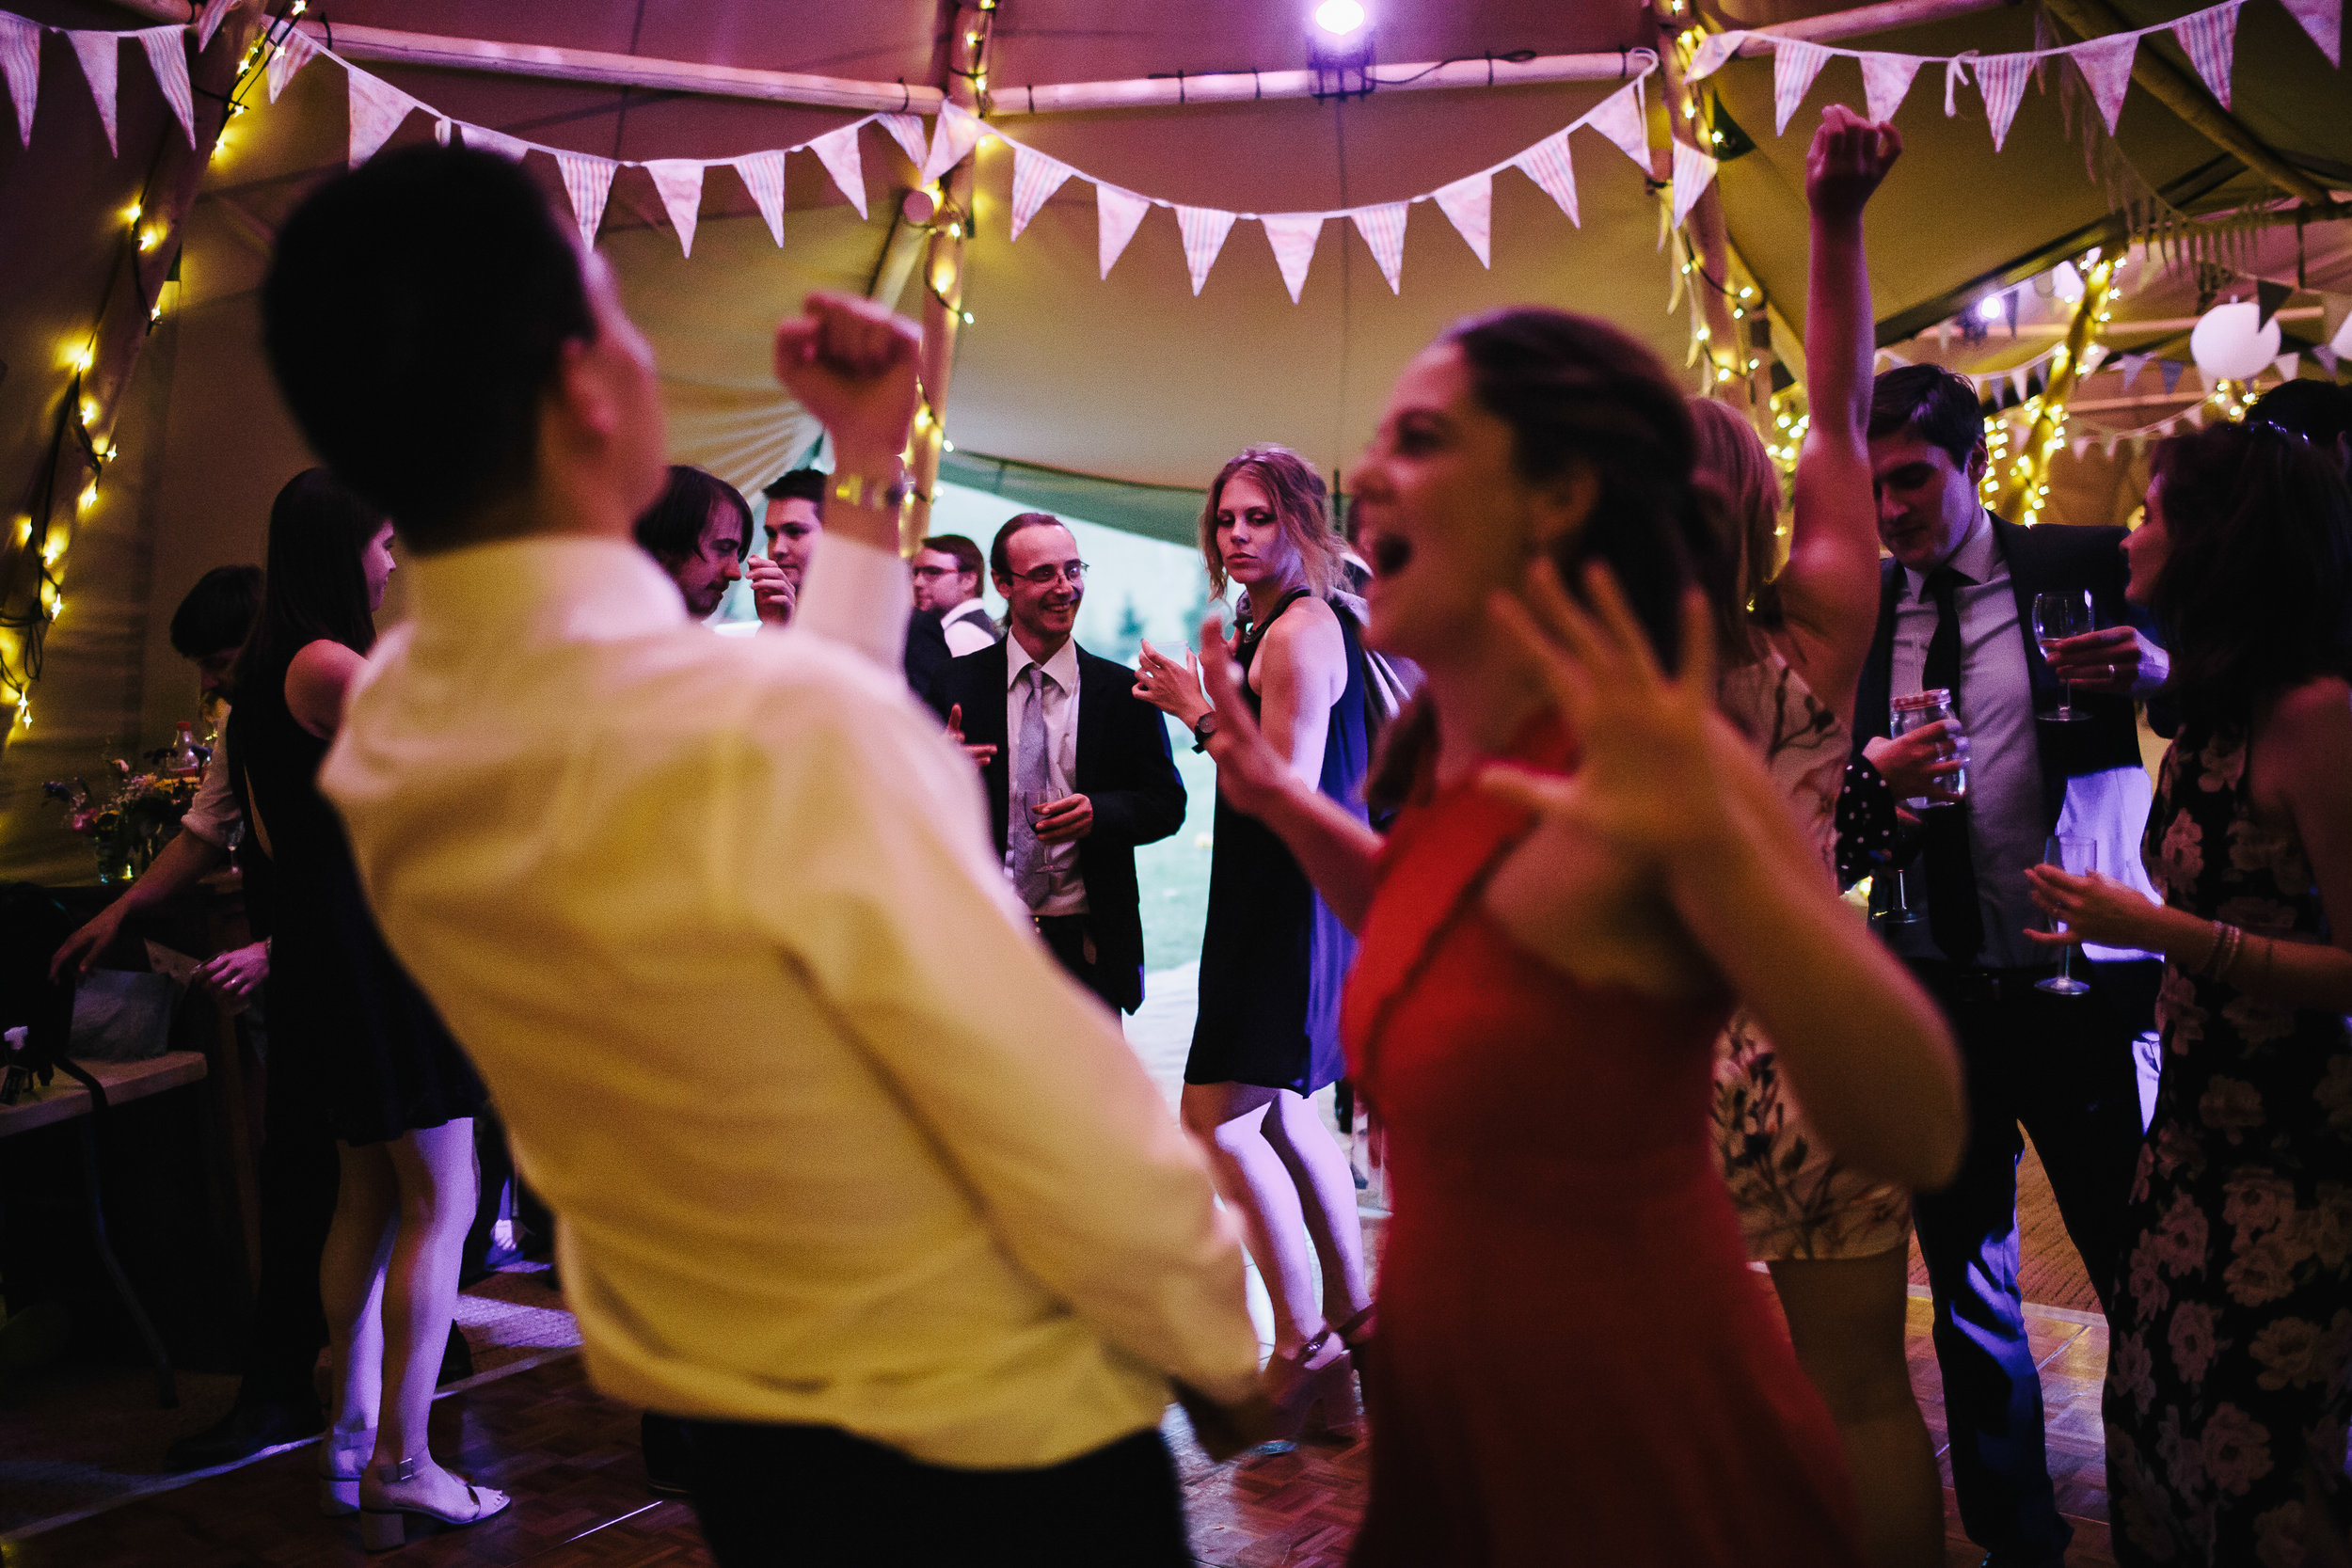  Rosie and Daniel's Festival styled wedding in Oxfordshire 